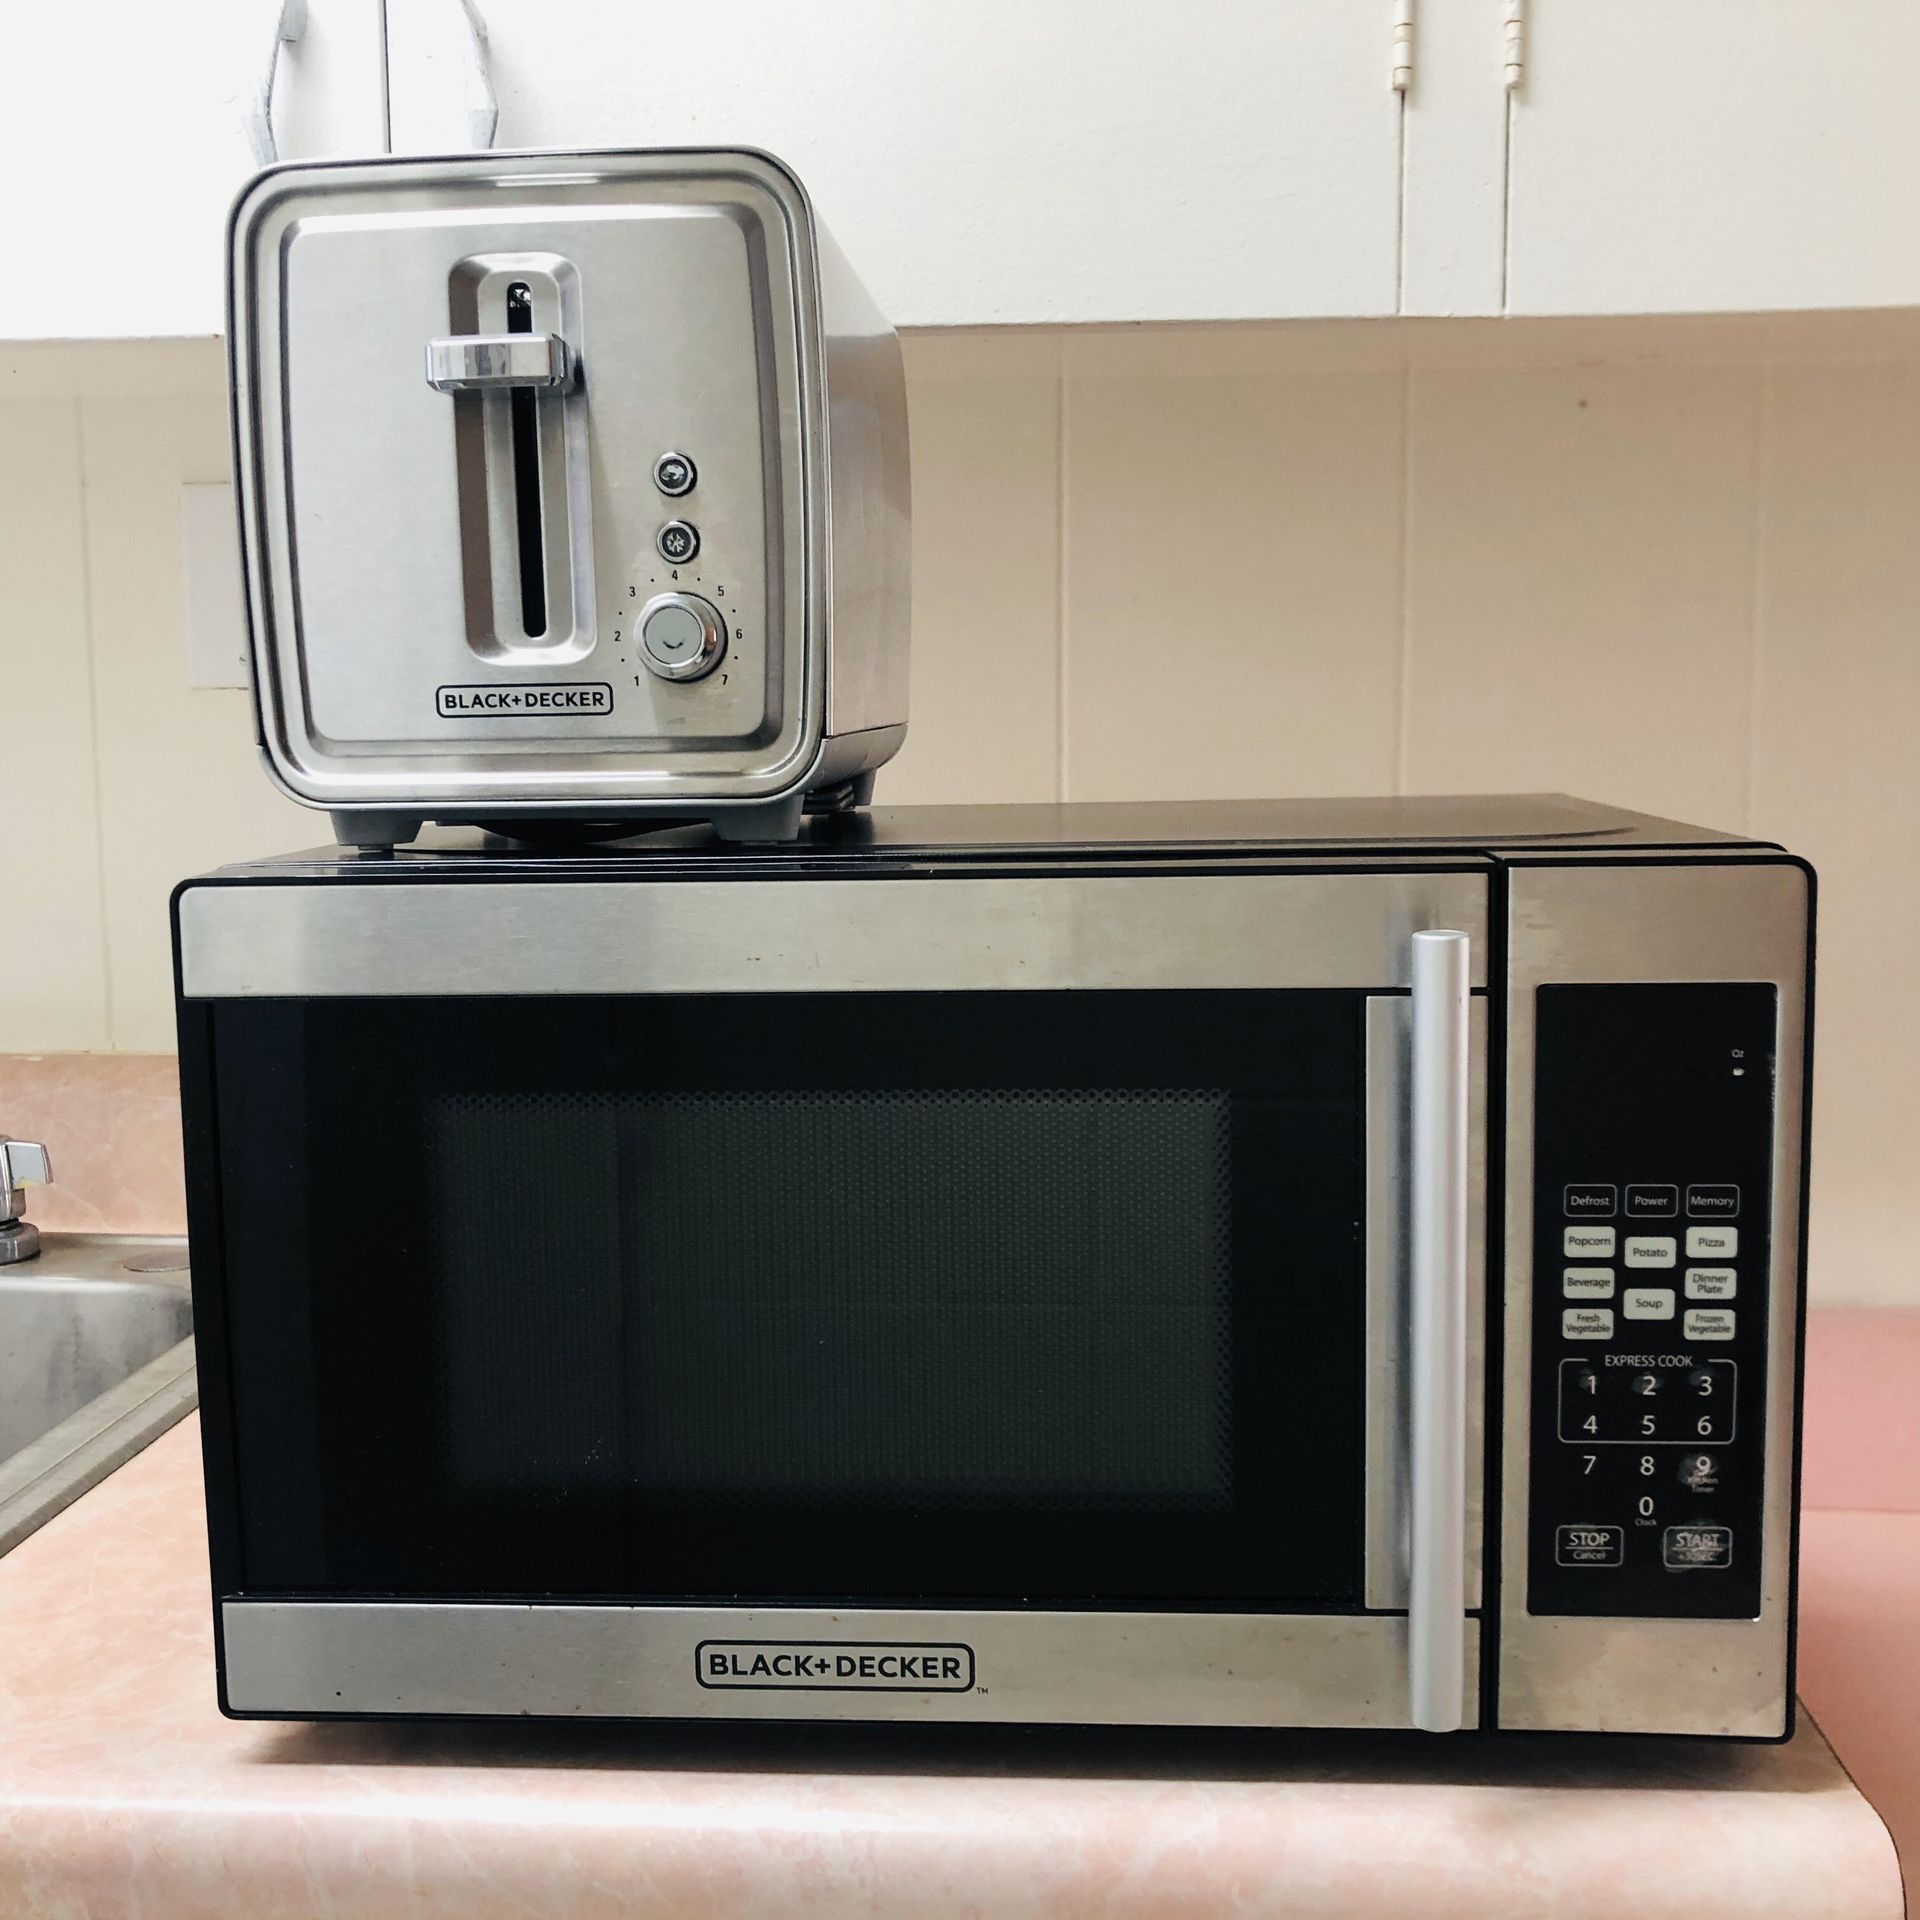 Black & Decker Microwave and toaster